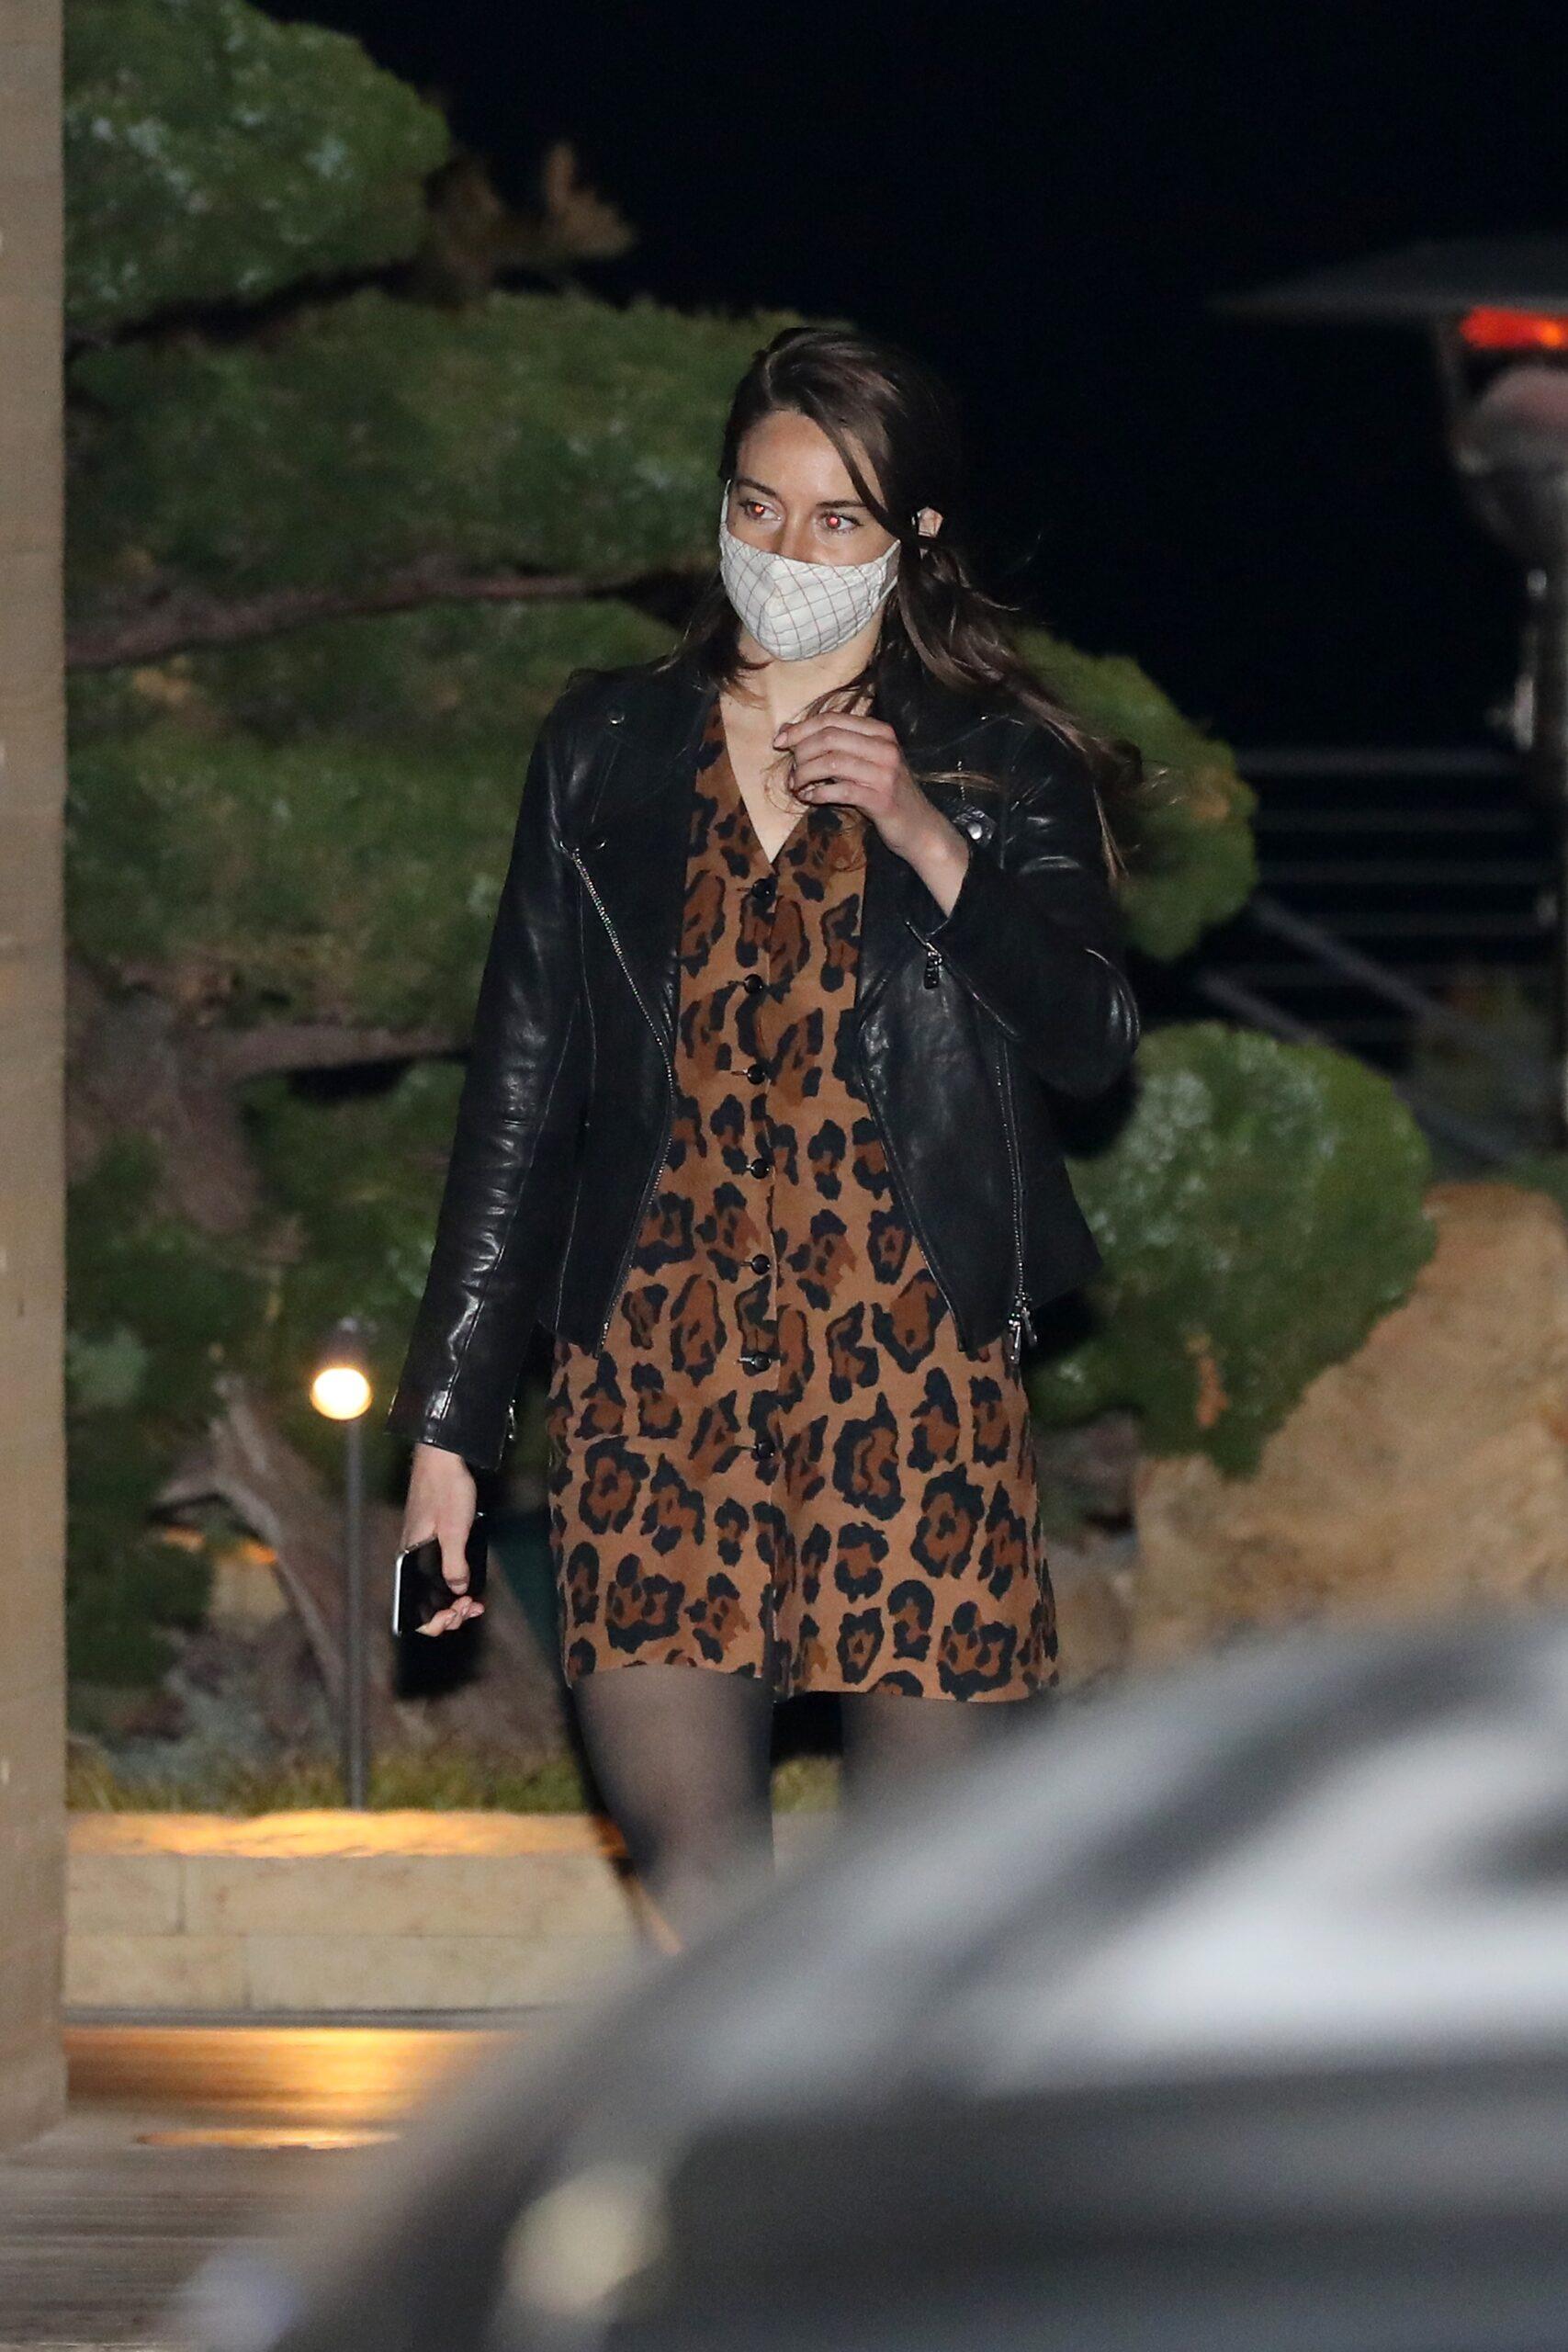 Aaron Rodgers and girlfriend Shailene Woodley are seen leaving Nobu Malibu after having dinner